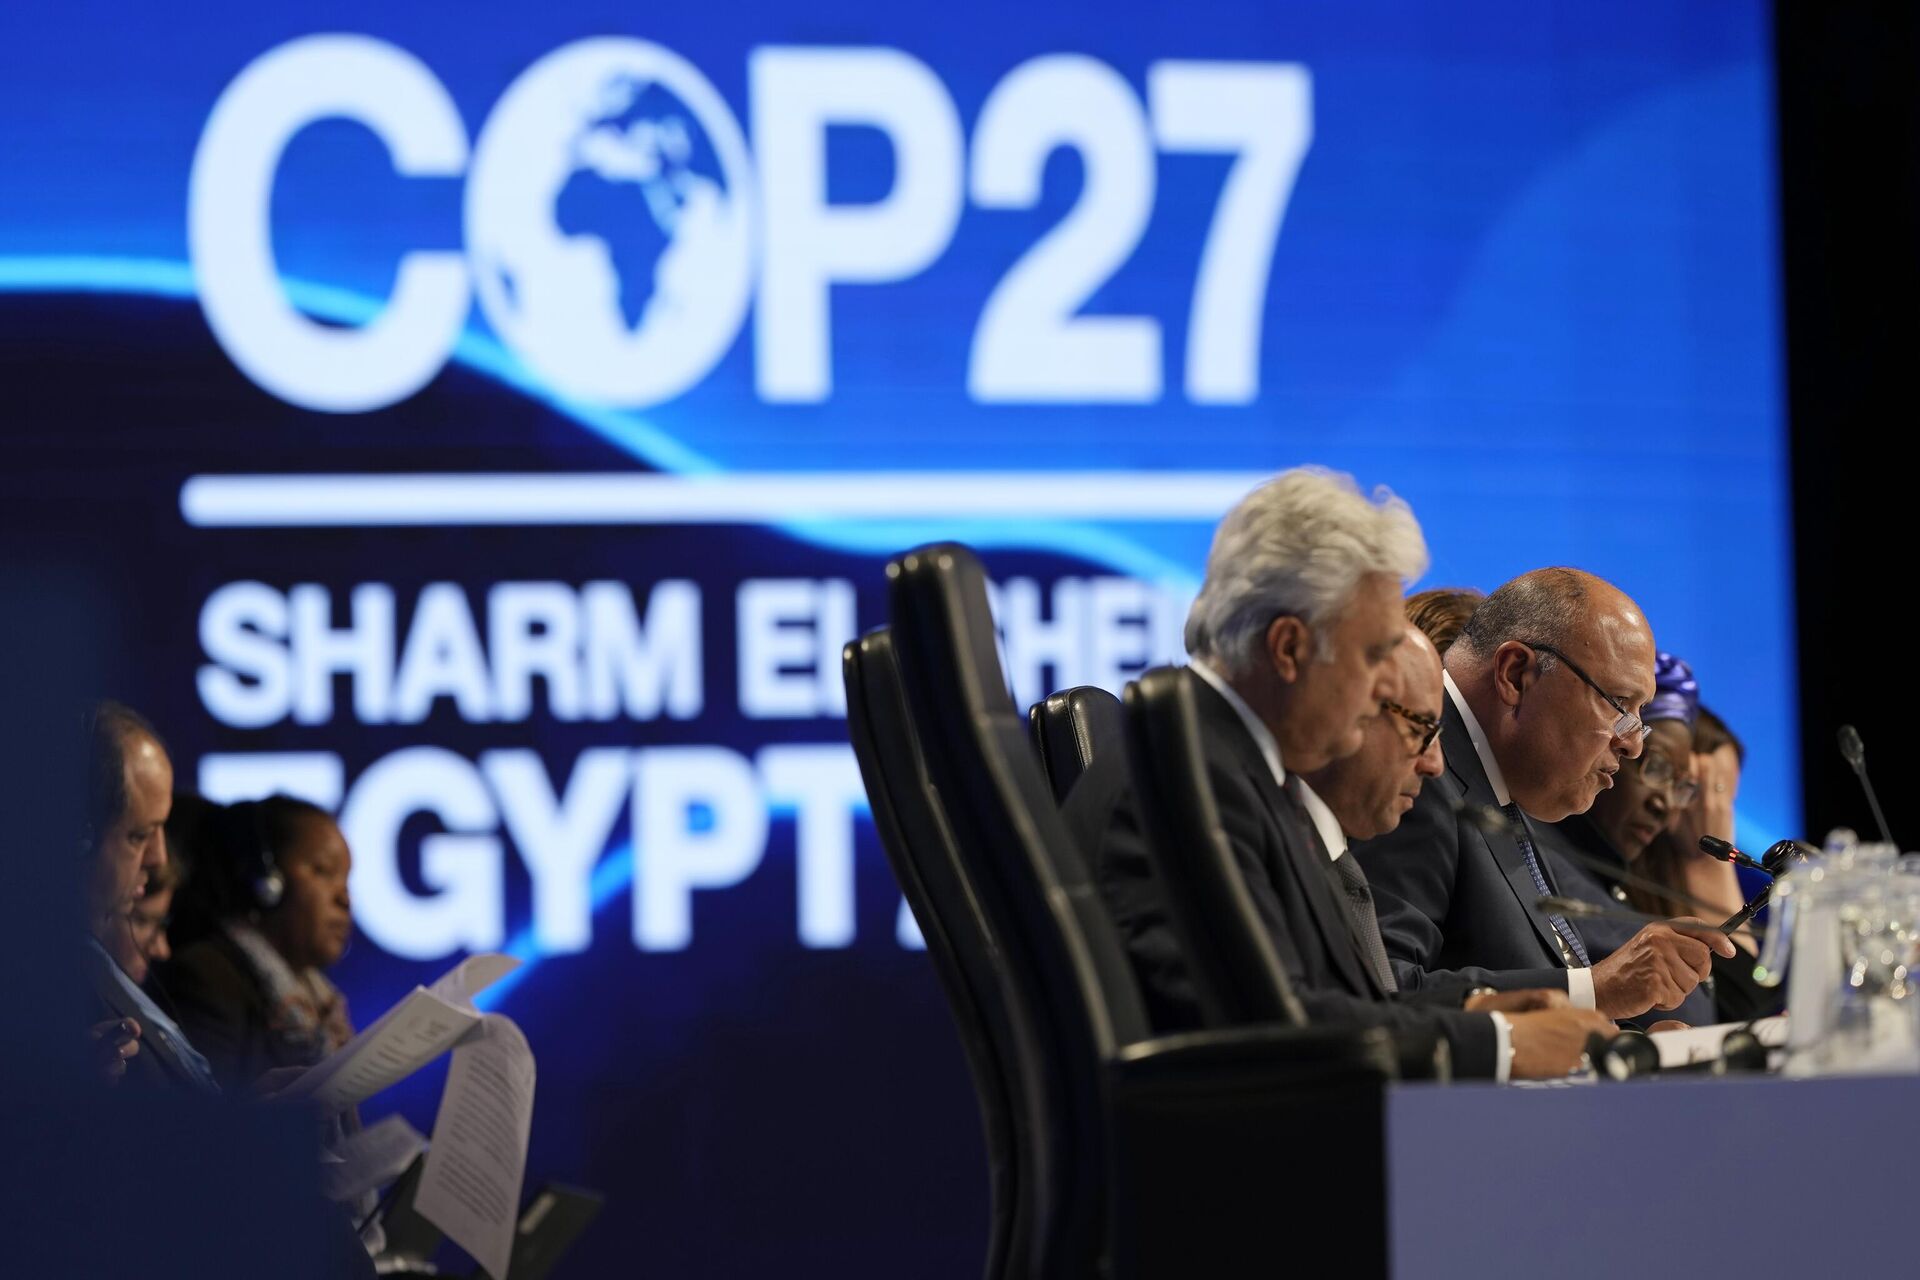 Sameh Shoukry, president of the COP27 climate summit, right, speaks during a closing plenary session at the U.N. Climate Summit, Sunday, Nov. 20, 2022, in Sharm el-Sheikh, Egypt. - Sputnik Africa, 1920, 31.12.2022